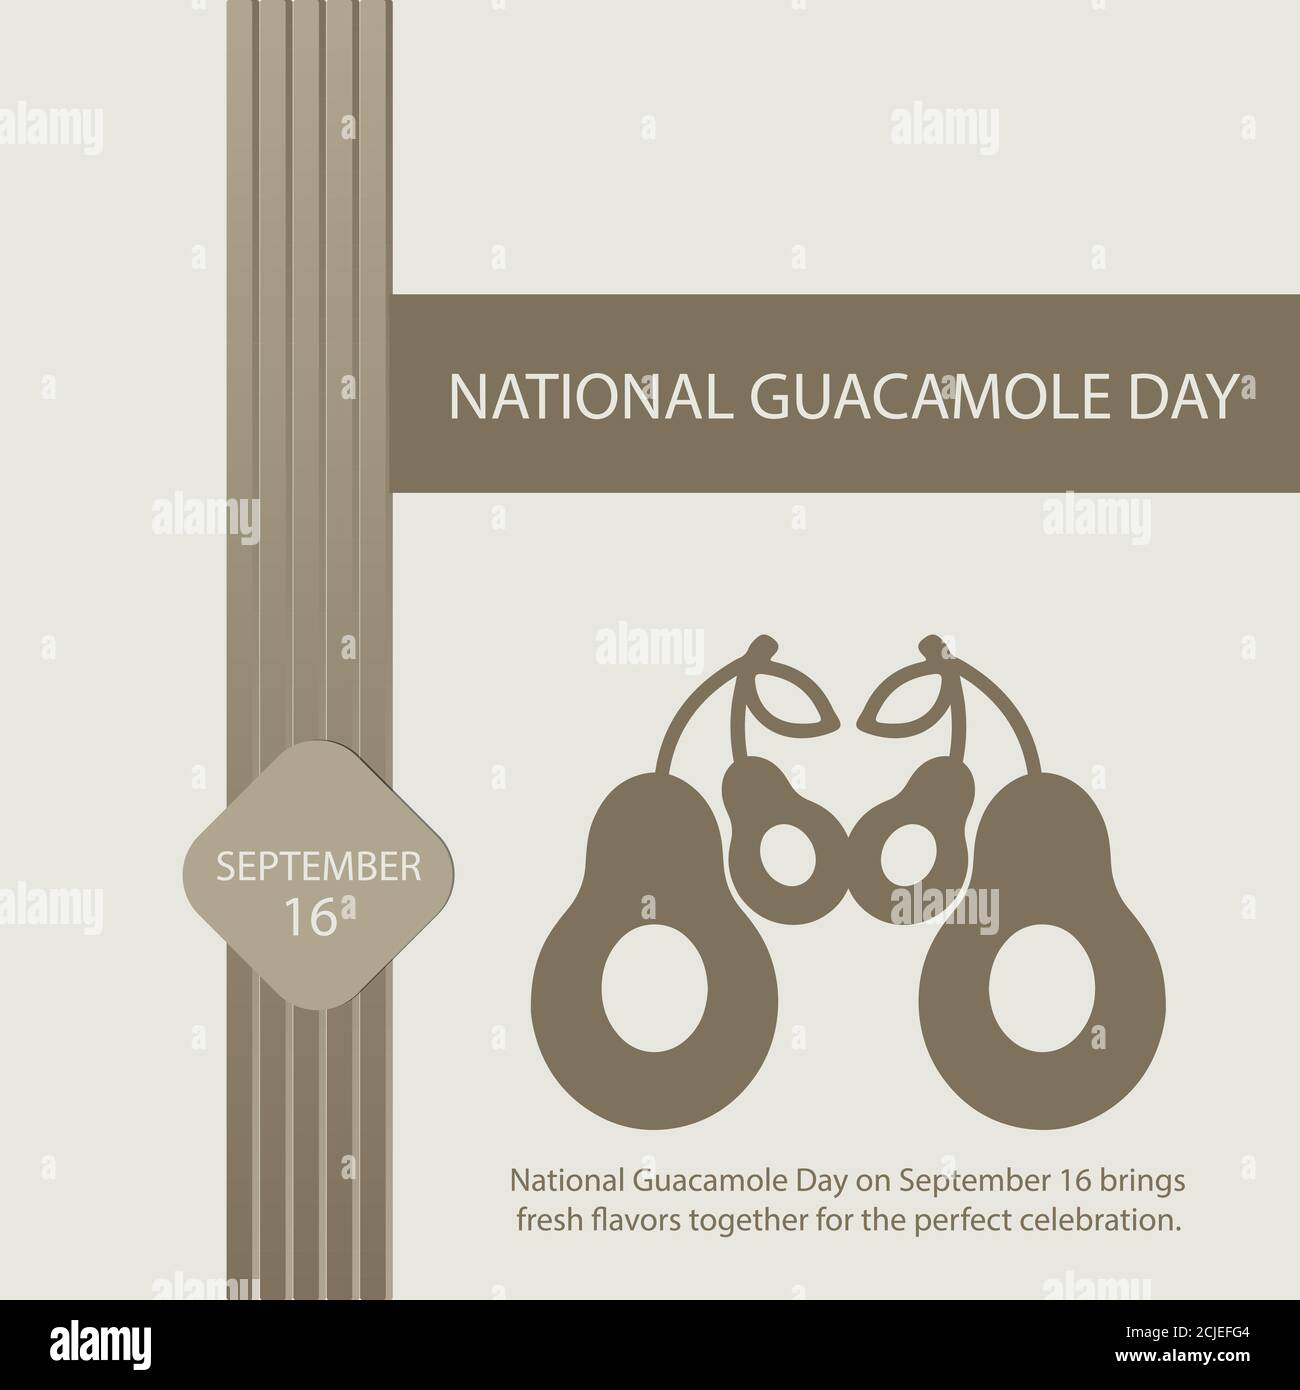 National Guacamole Day on September 16 brings fresh flavors together for the perfect celebration. Stock Vector